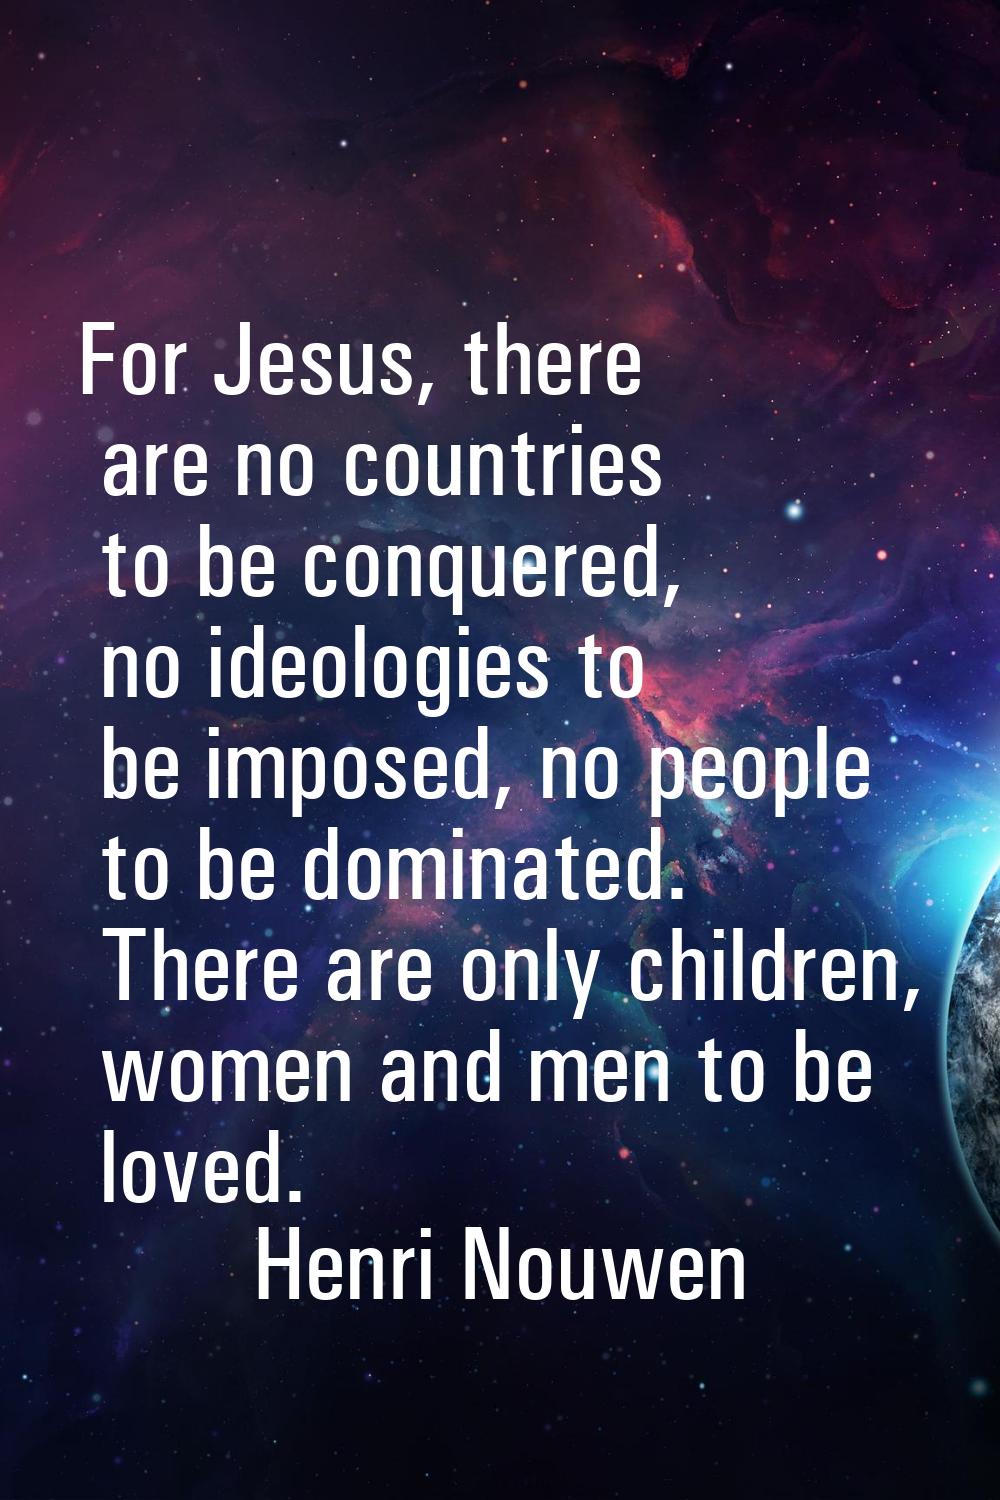 For Jesus, there are no countries to be conquered, no ideologies to be imposed, no people to be dom